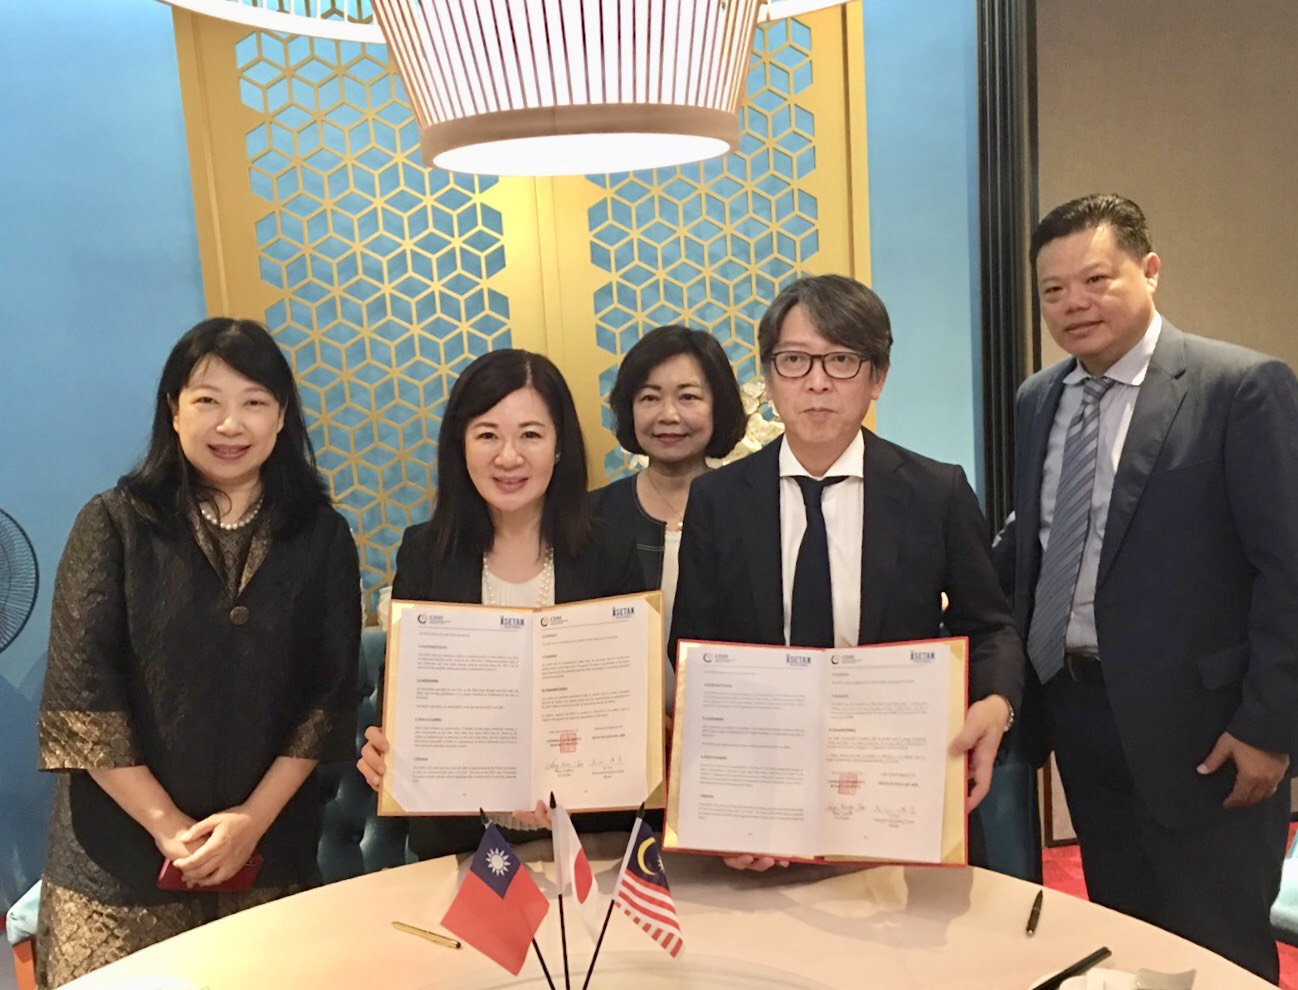 COA divisional chief Tang Shu-hua and Taiwan’s representative in Malaysia Anne Hung were present at the signing of the MOU between the CDRI and Isetan of Japan.